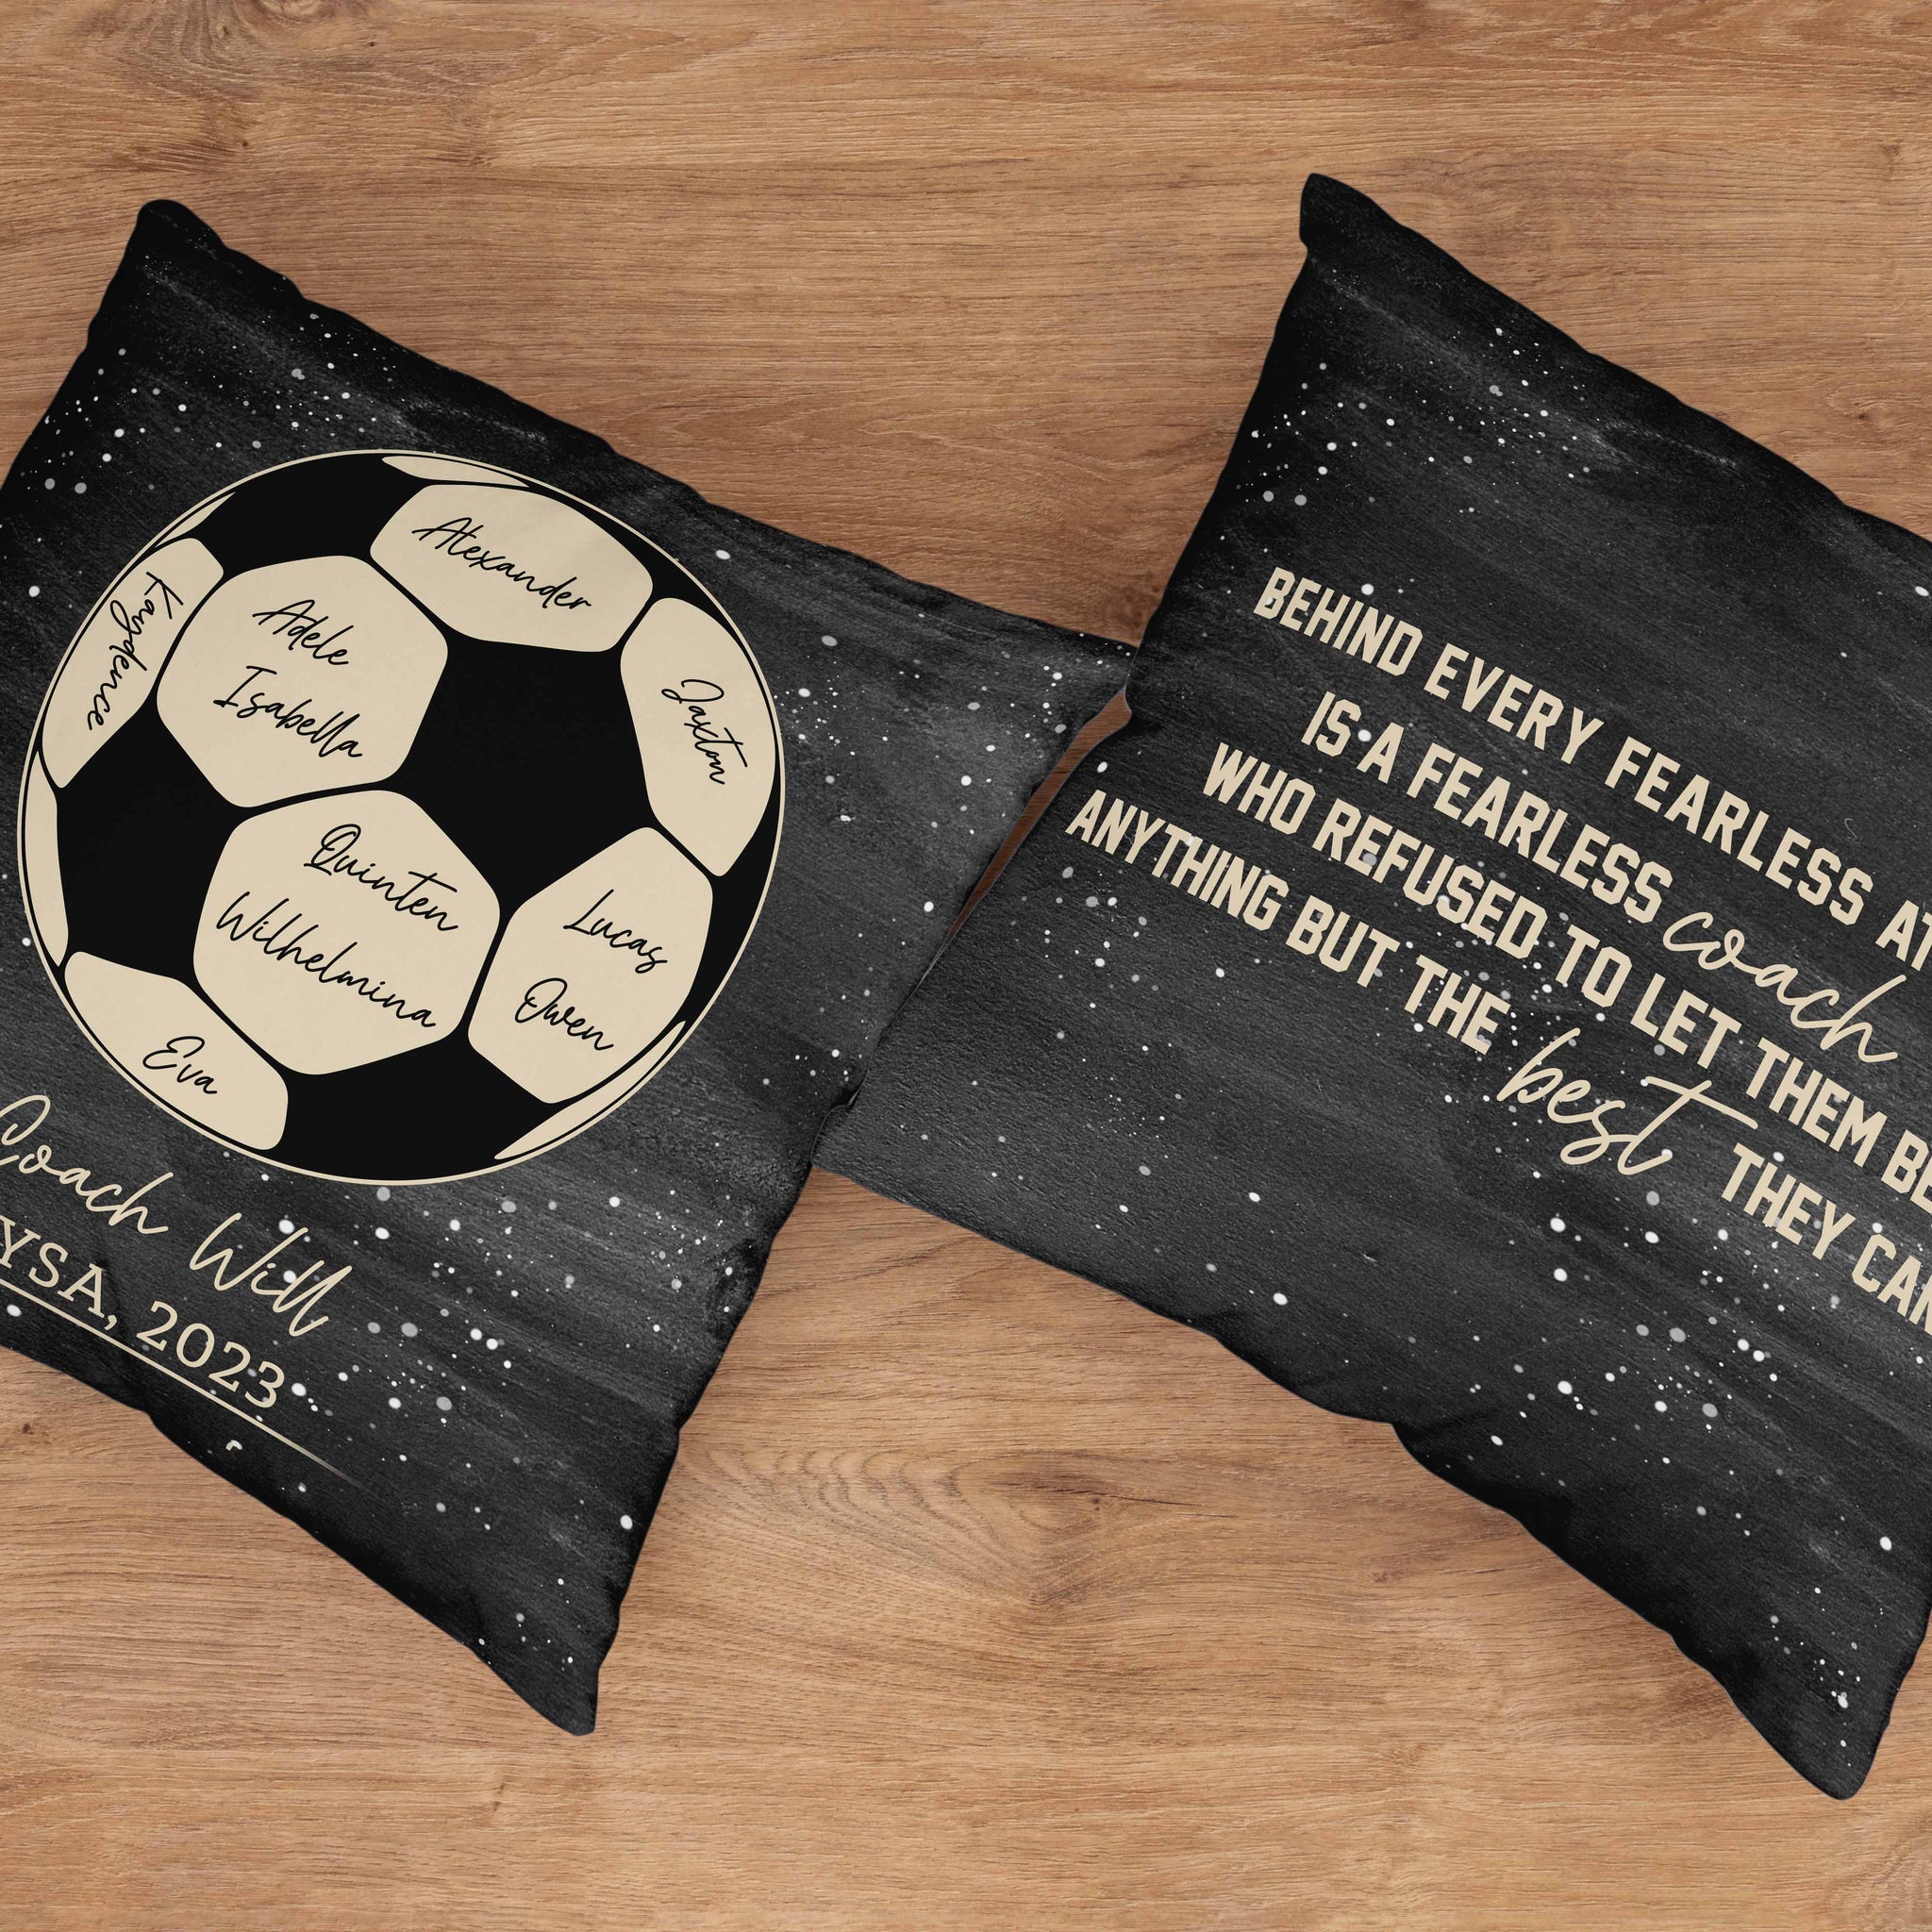 Personalized Soccer Pillow, Soccer Pillow, Coach Pillow, Thank You Soccer Coach Pillow, Soccer Team Gift For Coach Pillow, Custom Name Pillow, Soccer Coach Gift